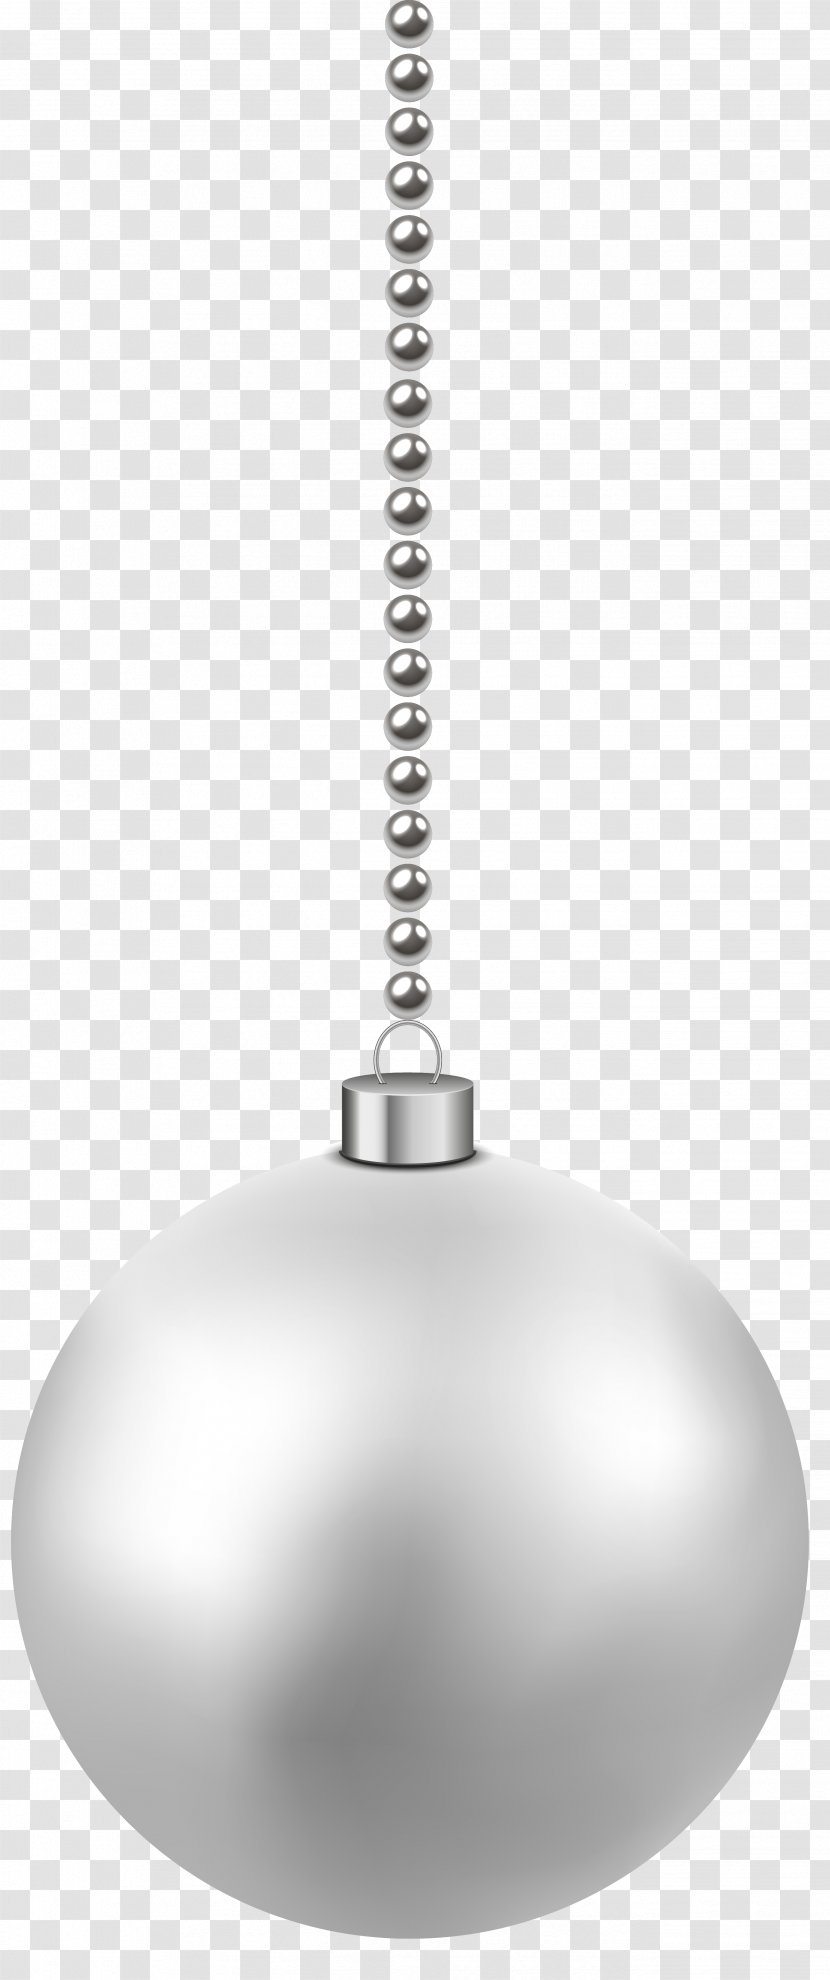 Black And White Lighting Light Fixture - Ceiling - Christmas Hanging Ball Clipart Image Transparent PNG